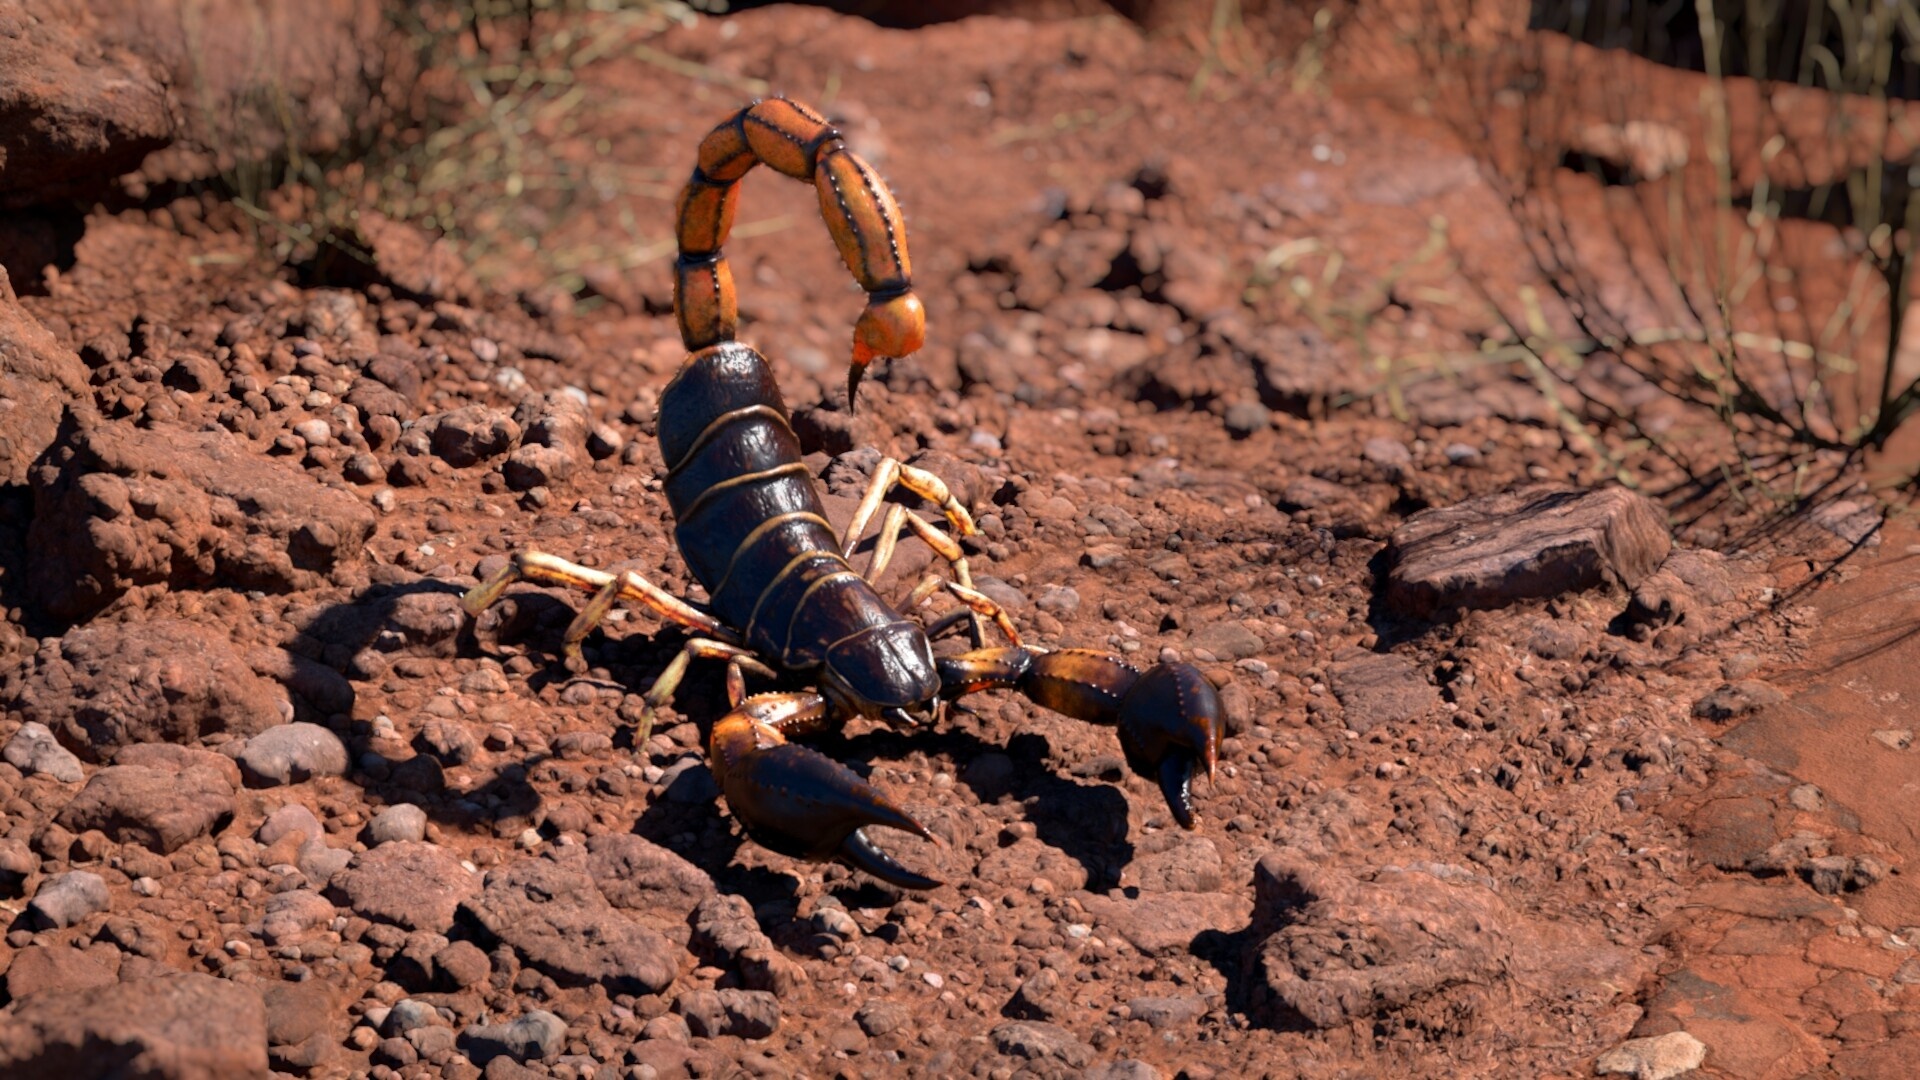 Scorpion (Animal): Able to control the amount of venom they release in each sting. 1920x1080 Full HD Wallpaper.